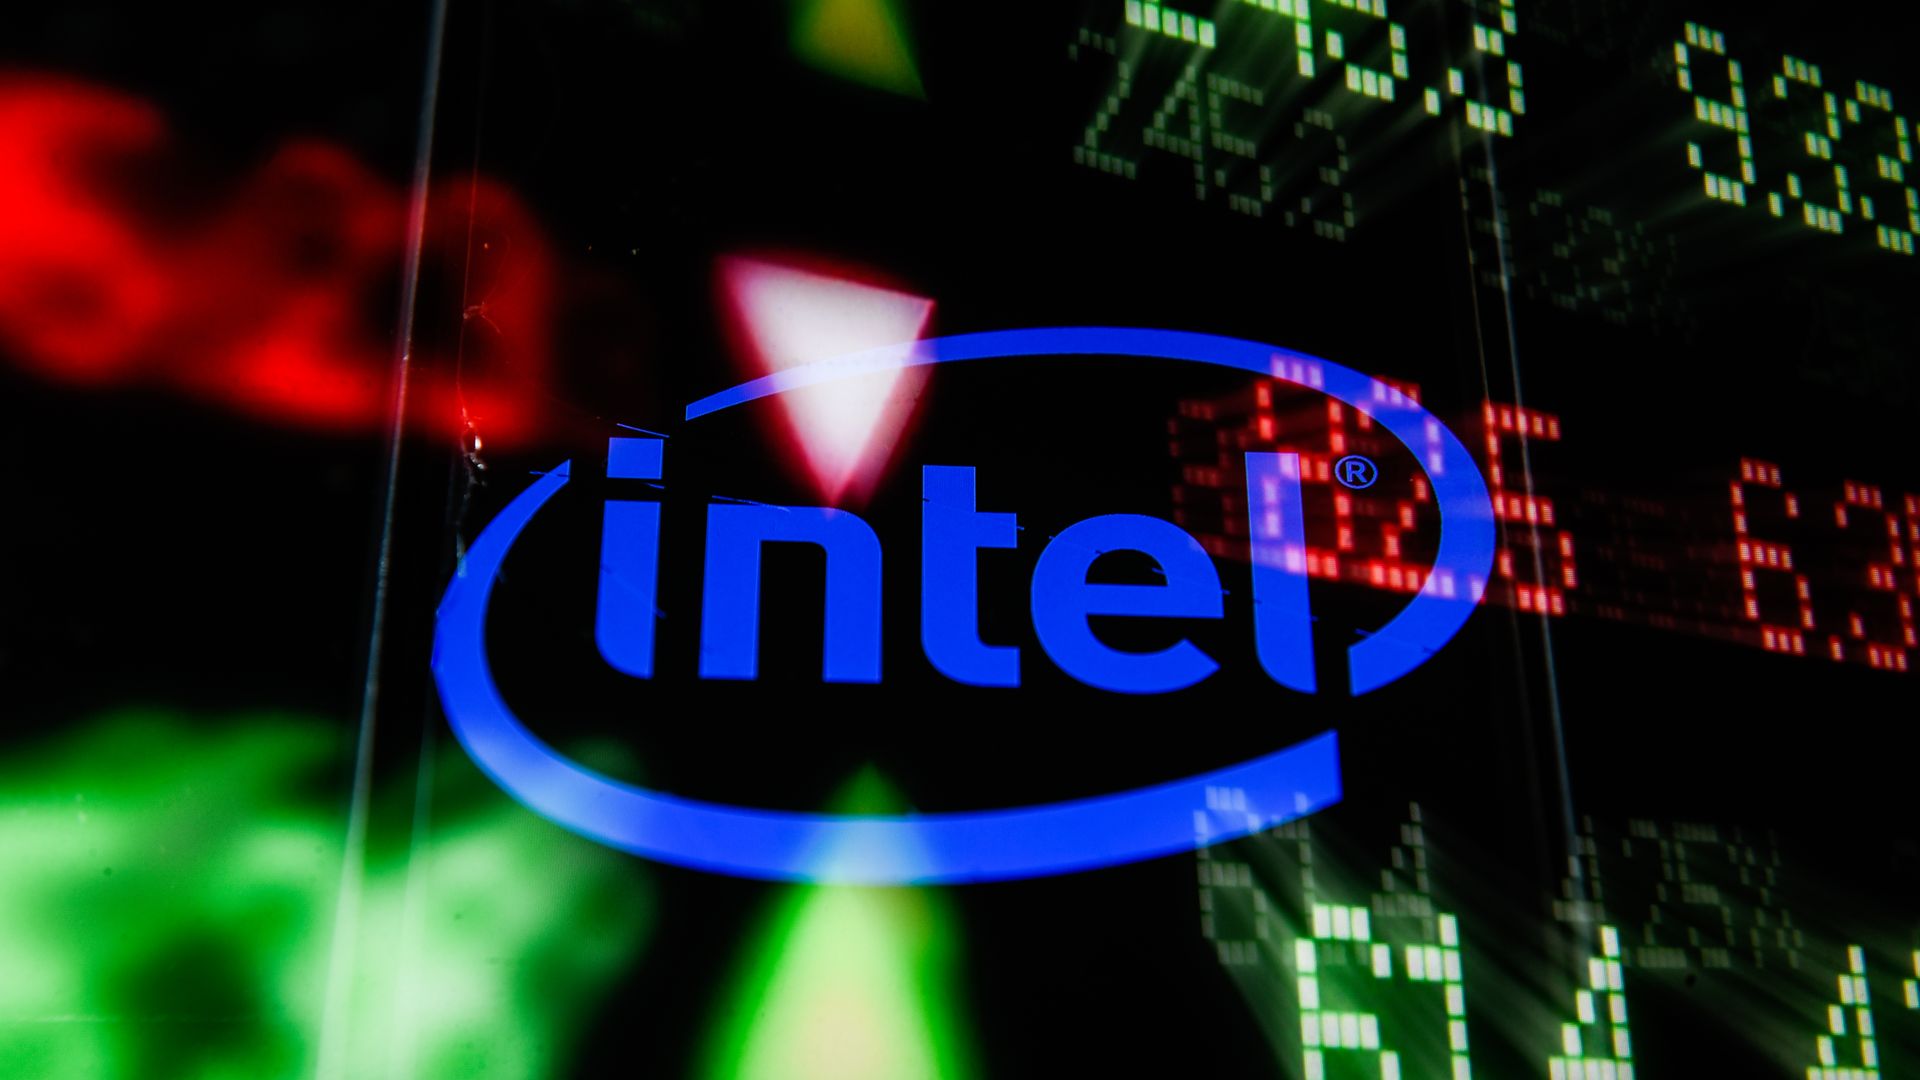 The intel logo is depicted on a screen, superimposed over various stock prices